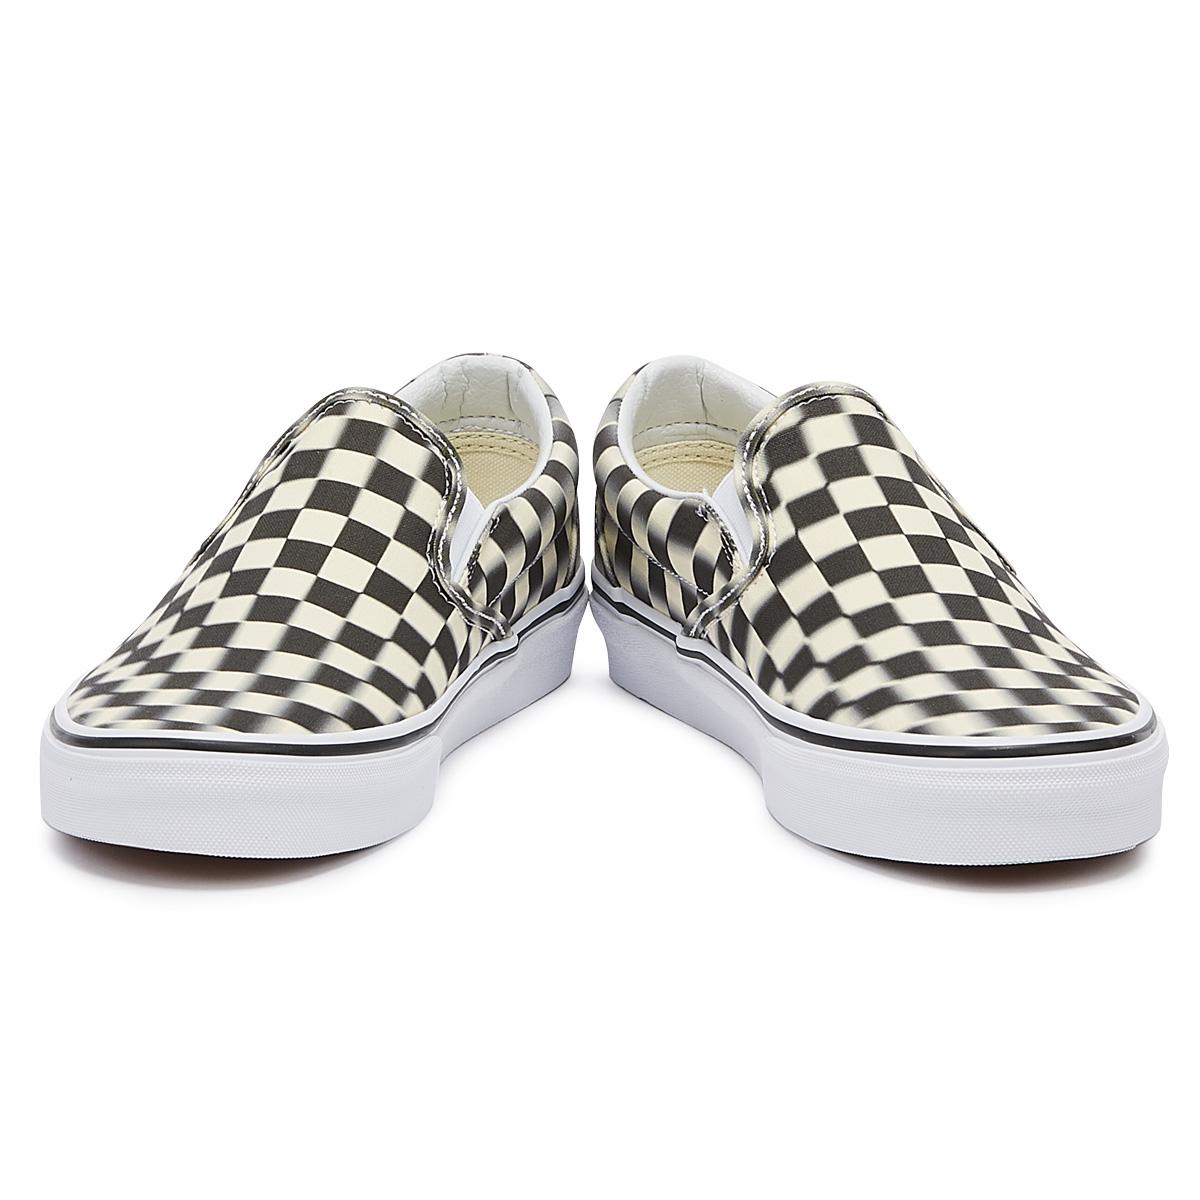 Vans Canvas Classic Blur Check Slip On Sneakers in Black for Men - Lyst